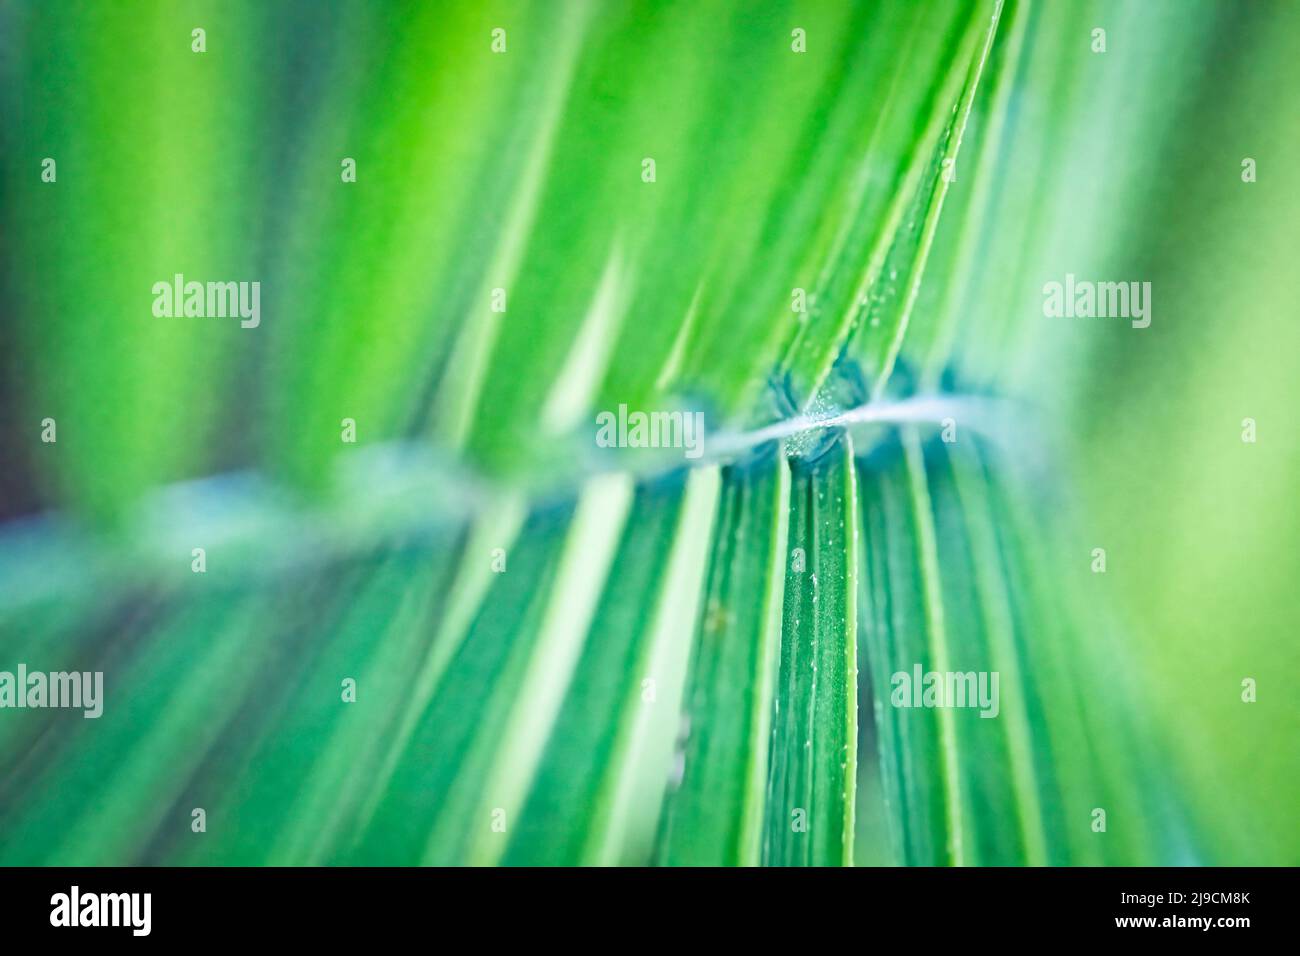 Abstract nature background - shallow focus on a palm frond. Stock Photo